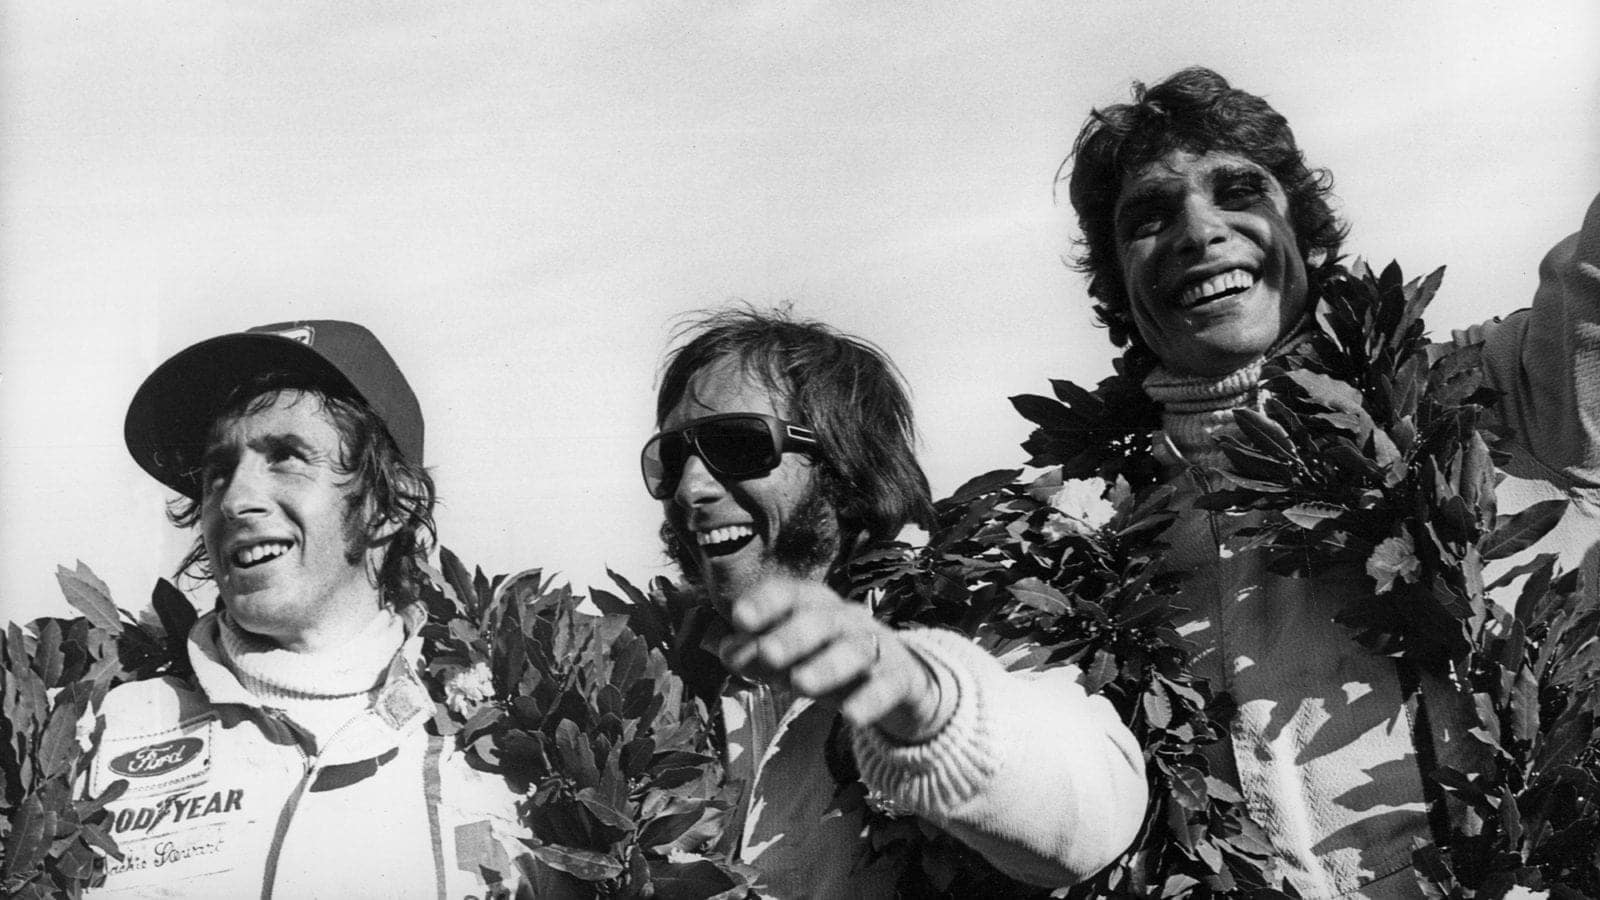 Emerson Fittipaldi Francois Cevert and JAckie Stewart on the podium at the 1973 Argentinian Grand Prix